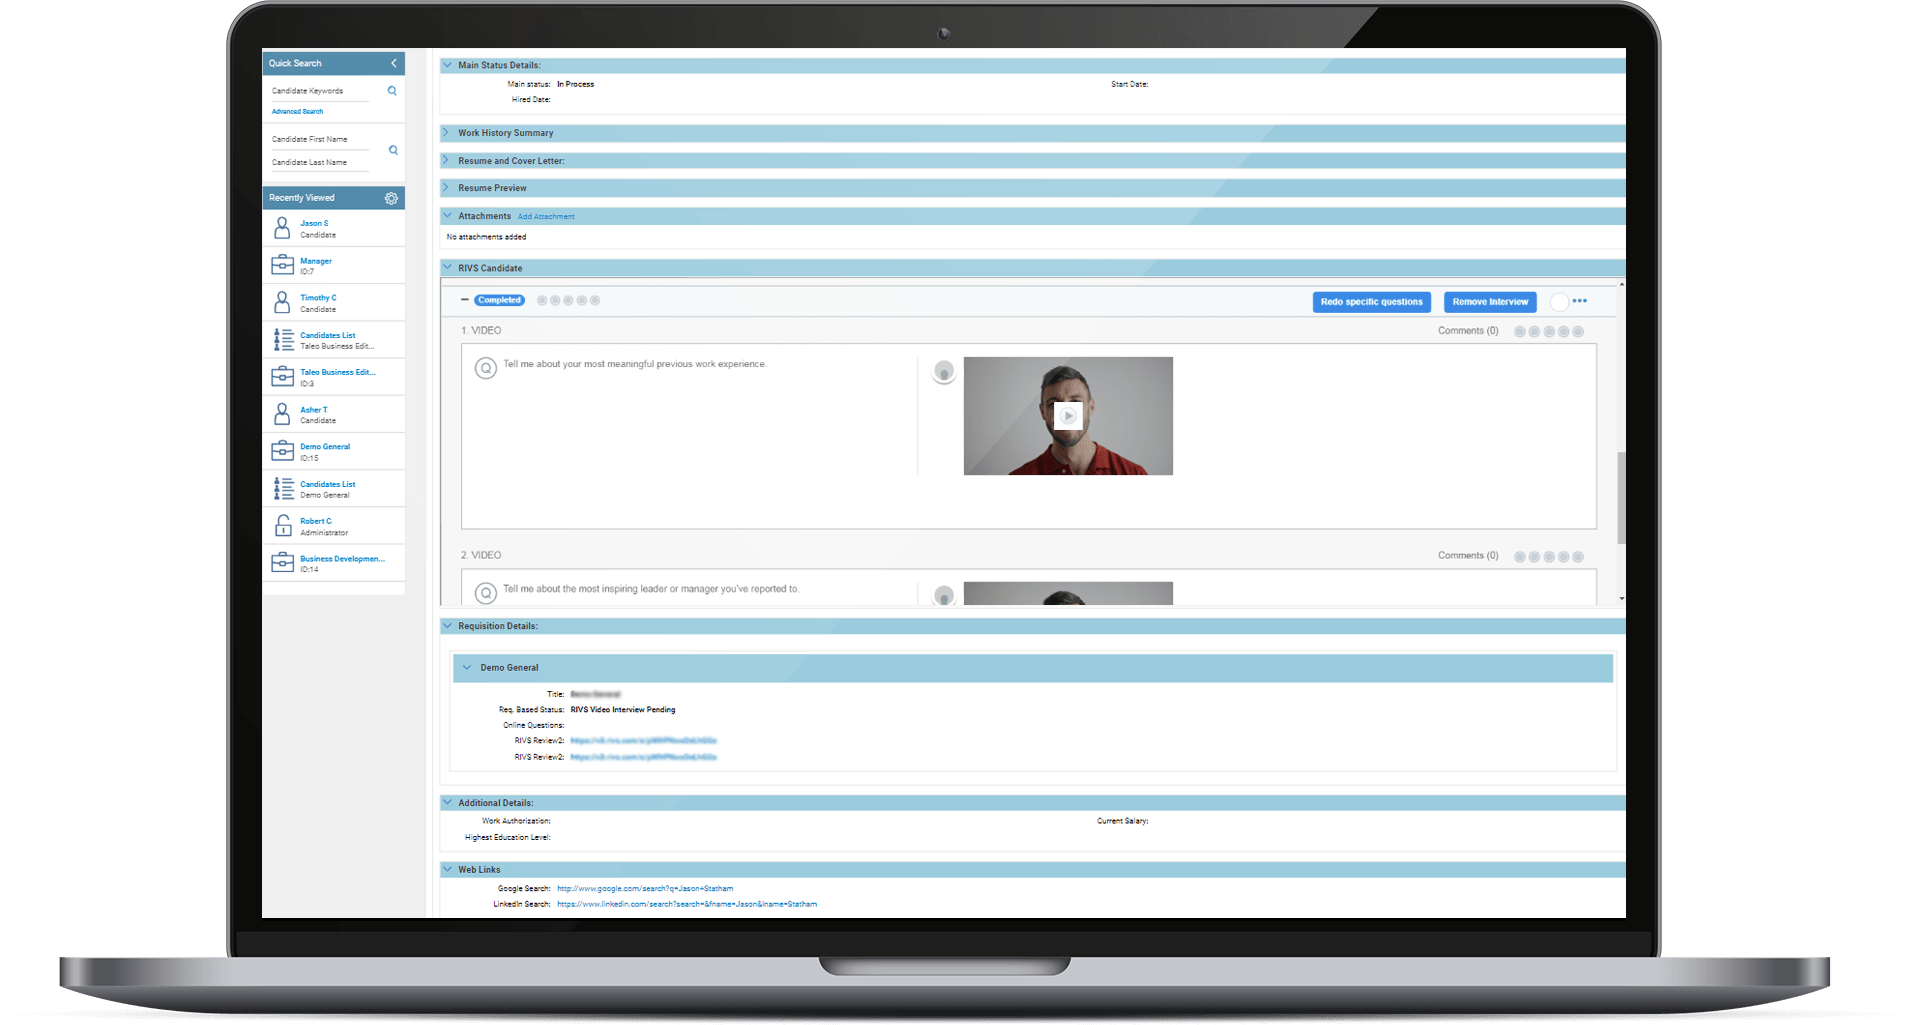 Review recorded candidate responses within the candidate profiles inside Tale Business Edition.